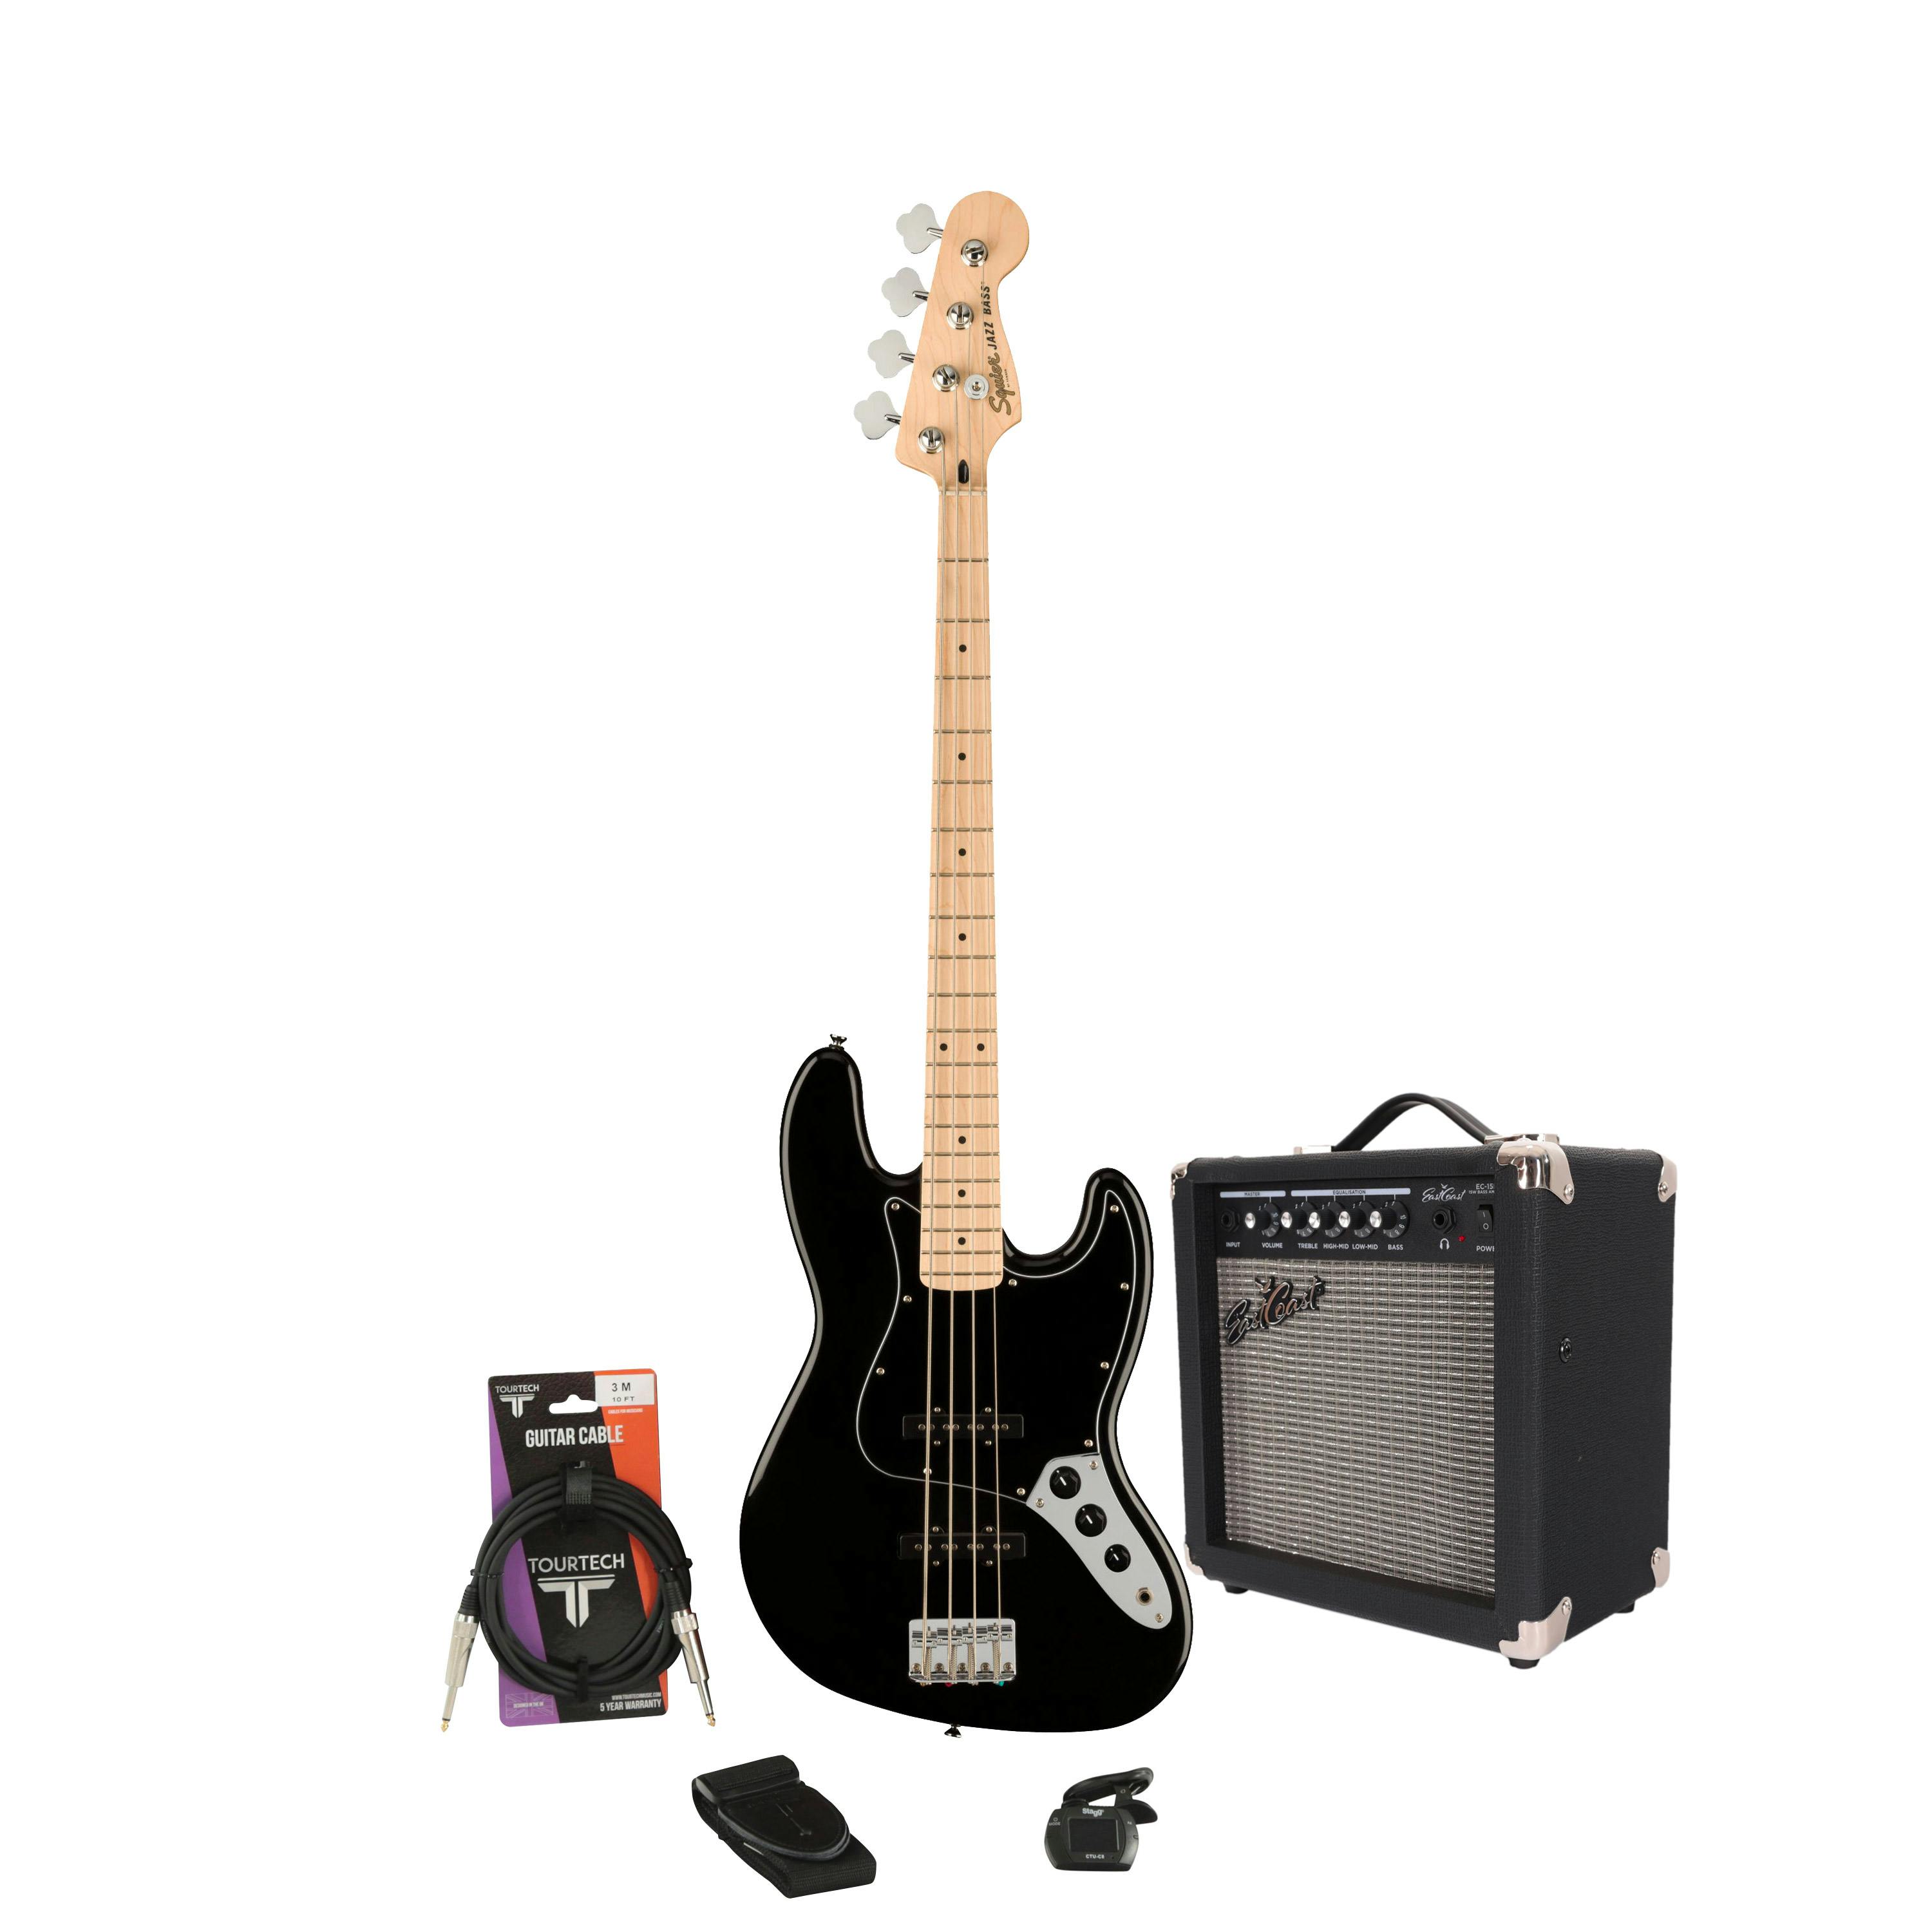 Squier Affinity Jazz in Black Bass Starter Pack with 15w Amp and Accessories